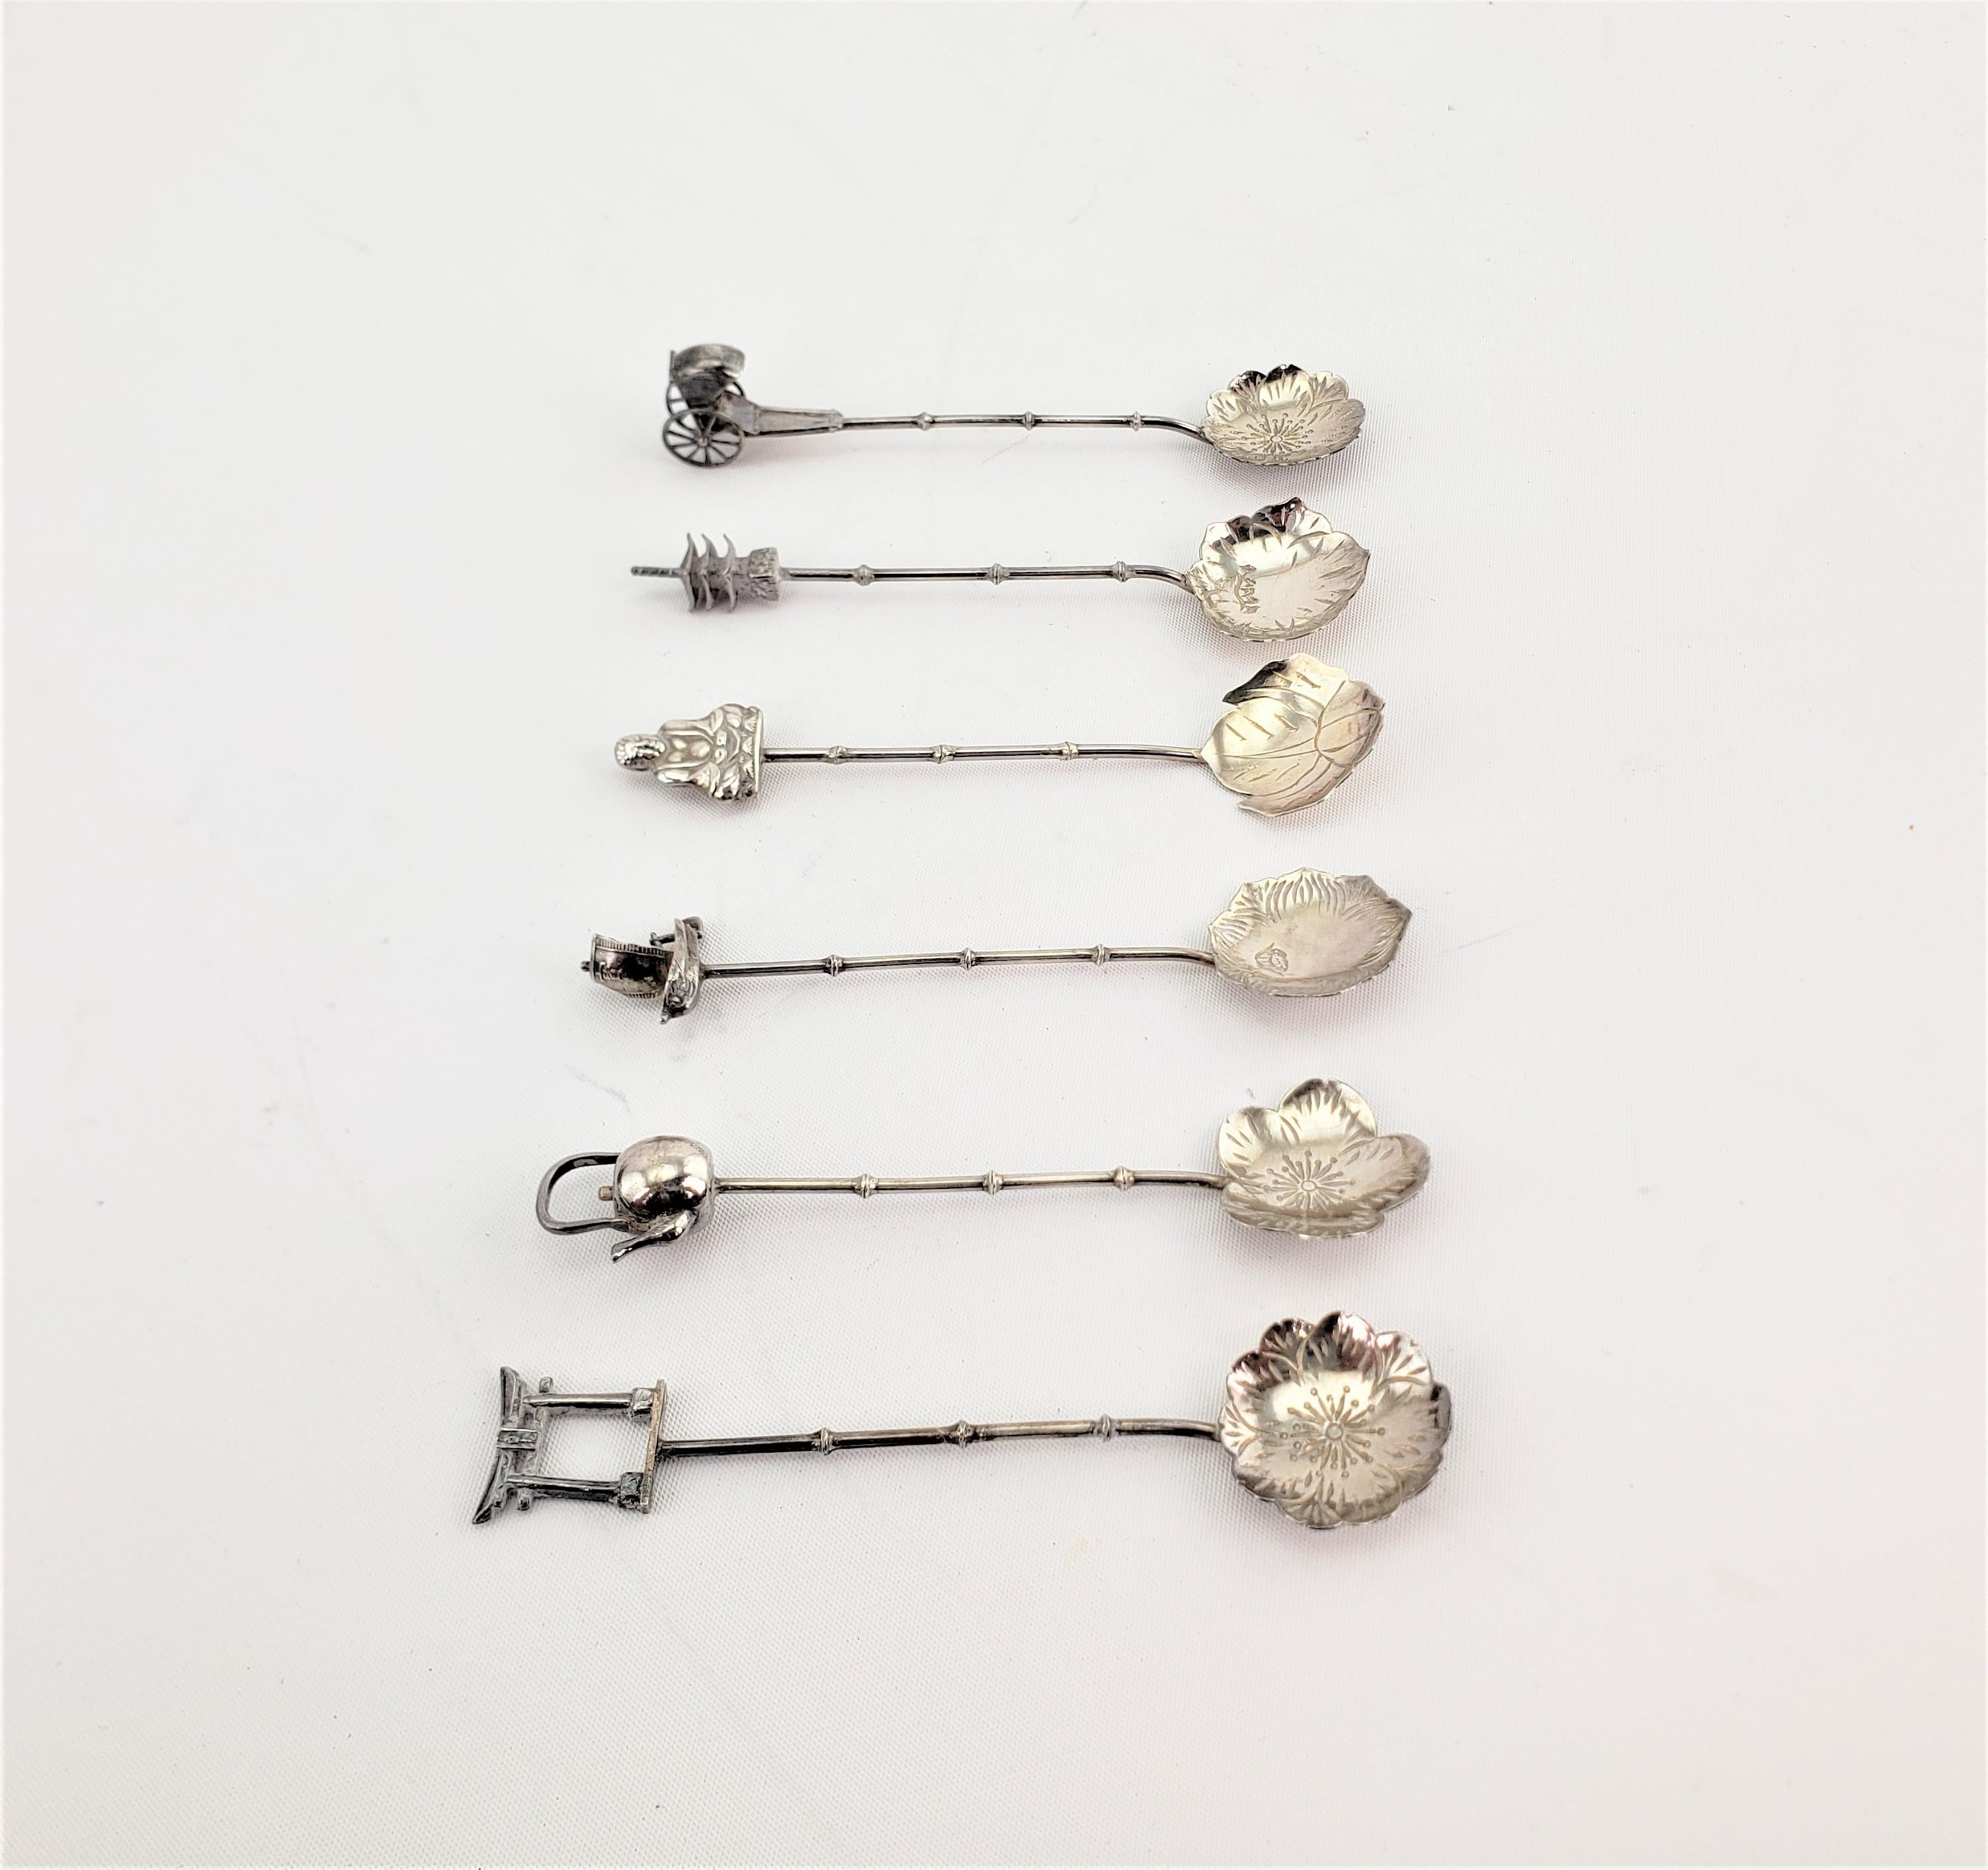 Set of 6 Sterling Silver Figural Japanese Coffee Sugar Spoons with Fitted Case In Good Condition For Sale In Hamilton, Ontario